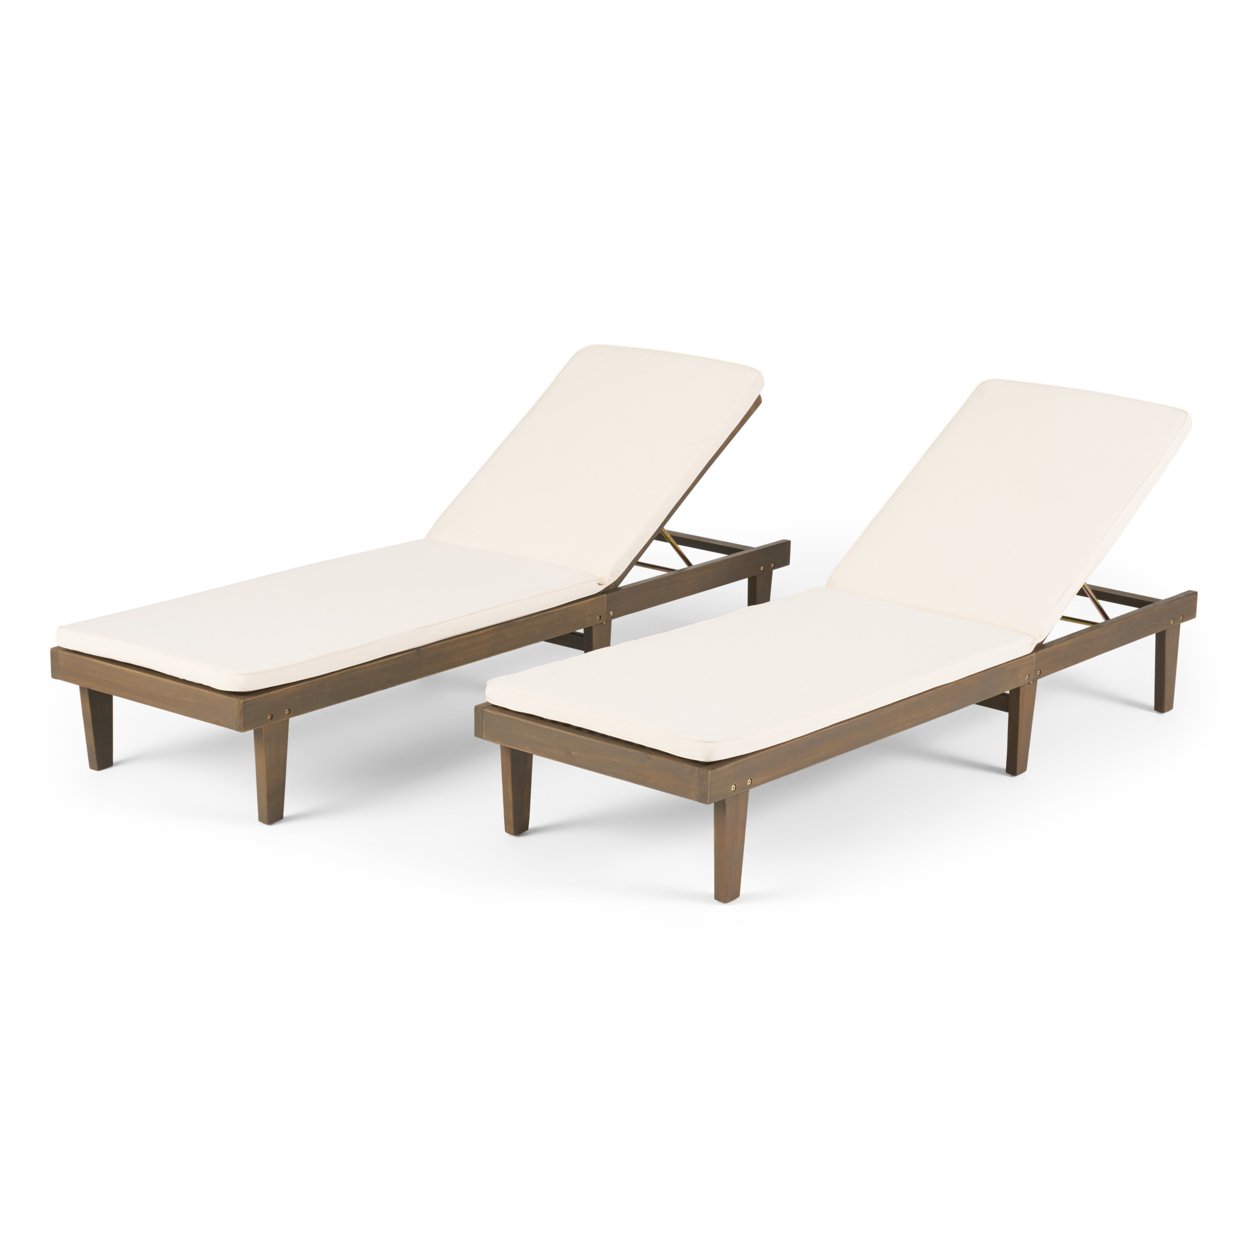 Madge Oudoor Modern Acacia Wood Chaise Lounge With Cushion (Set Of 2) - Gray Finish + Cream